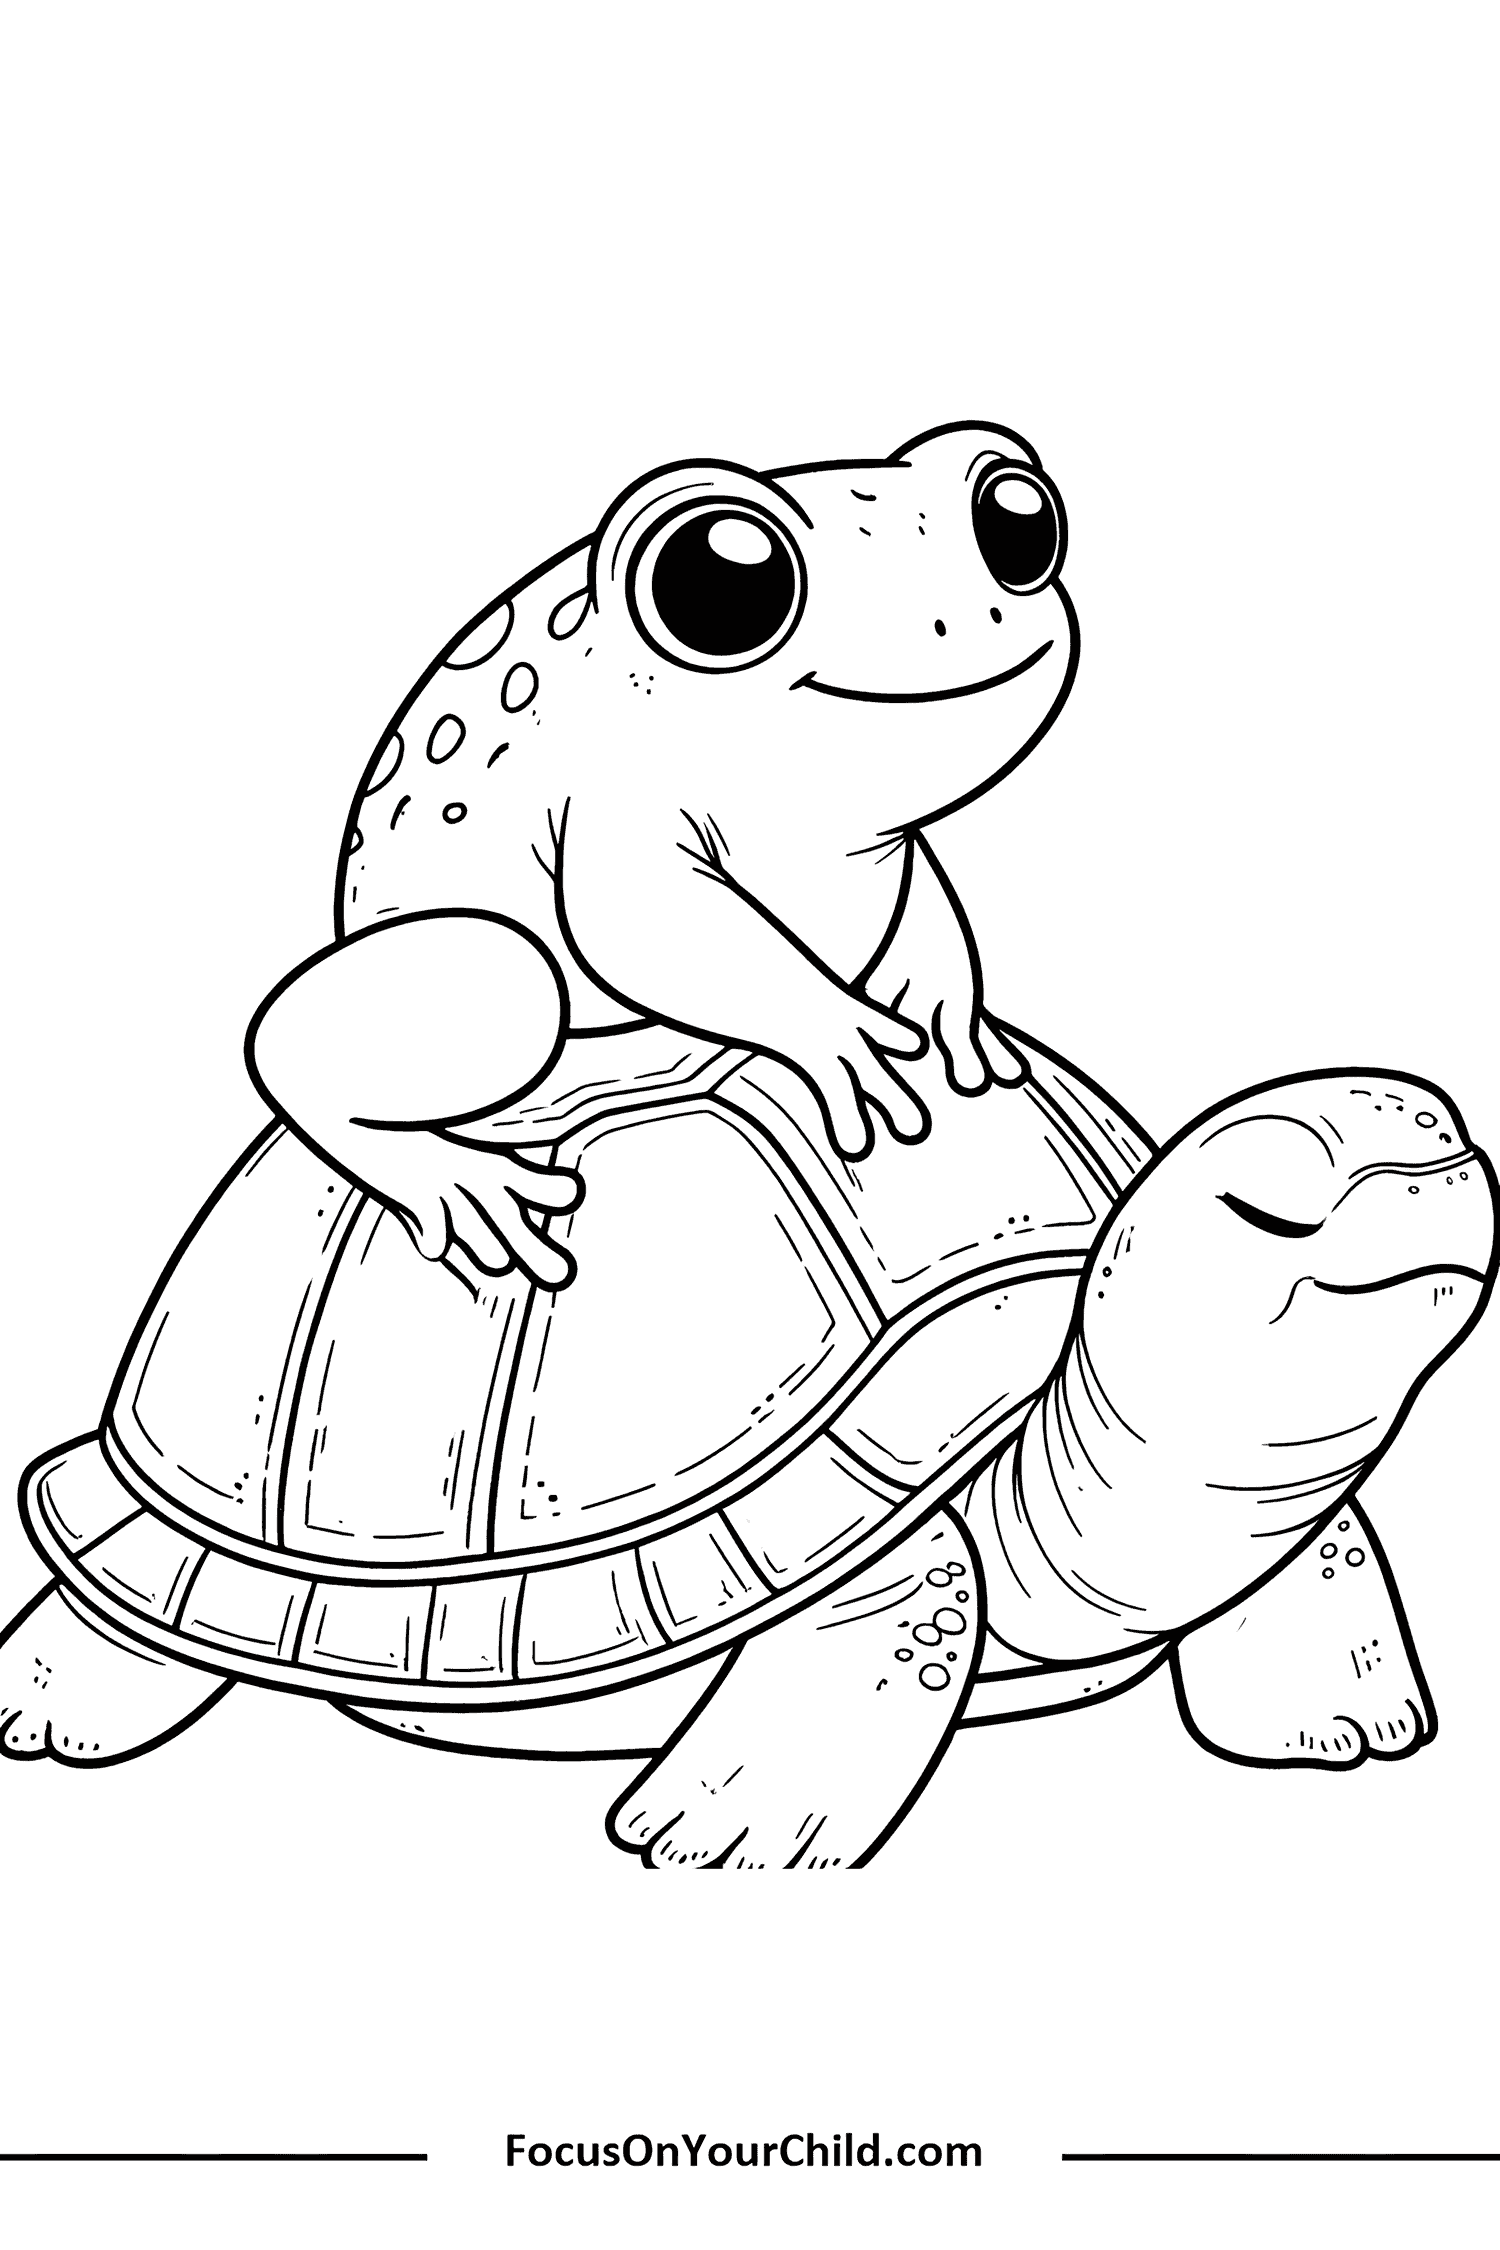 Whimsical frog and turtle illustration for child development at FocusOnYourChild.com.